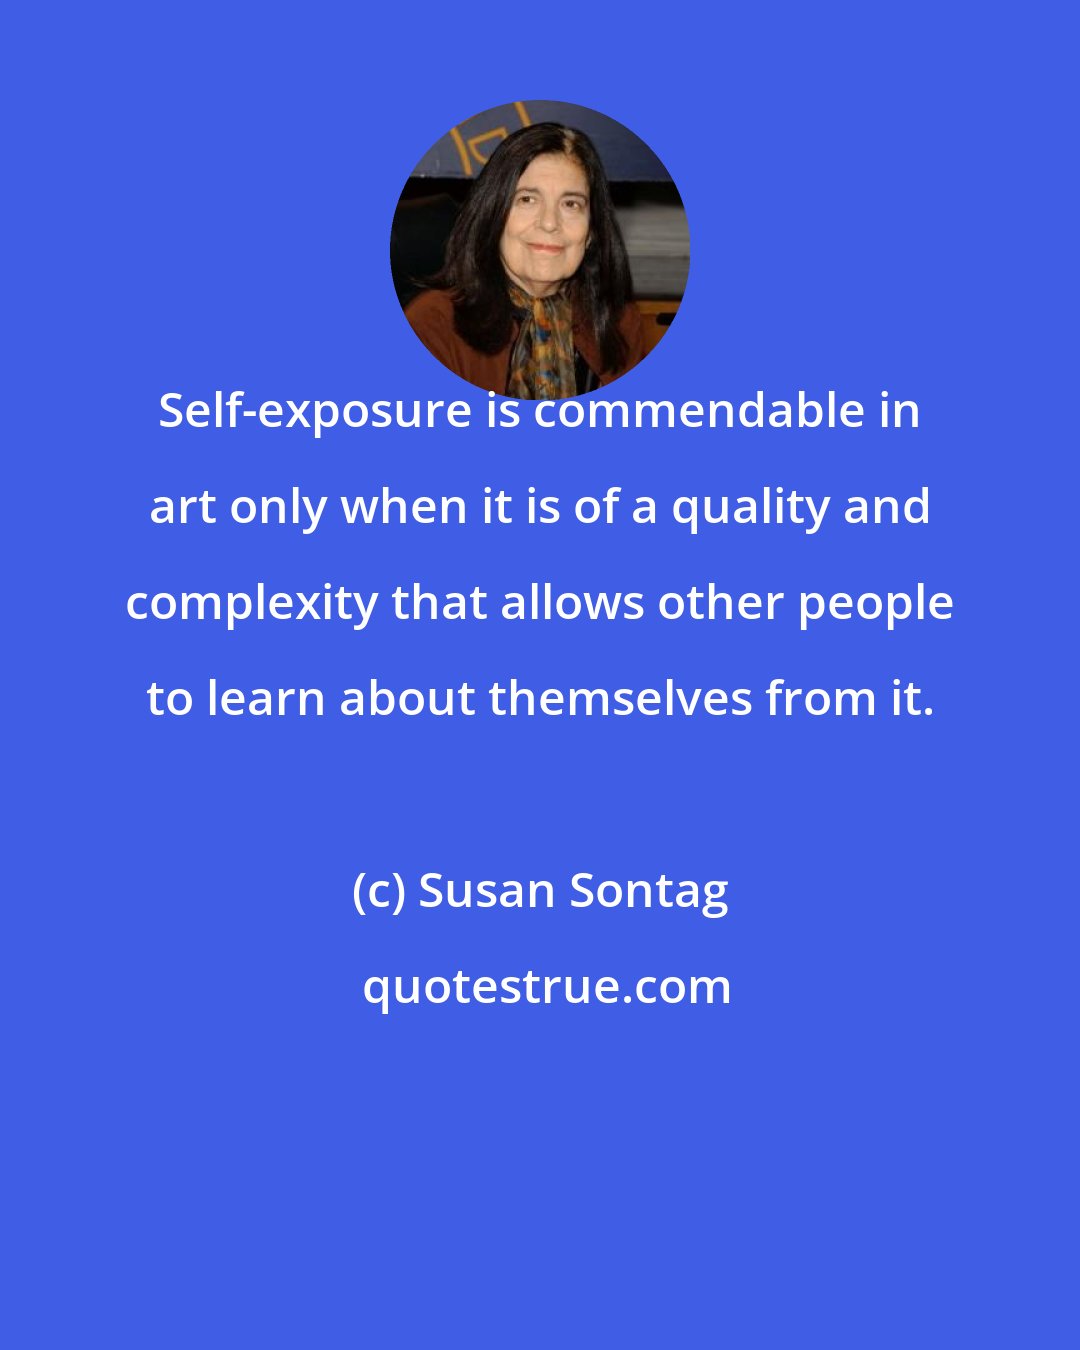 Susan Sontag: Self-exposure is commendable in art only when it is of a quality and complexity that allows other people to learn about themselves from it.